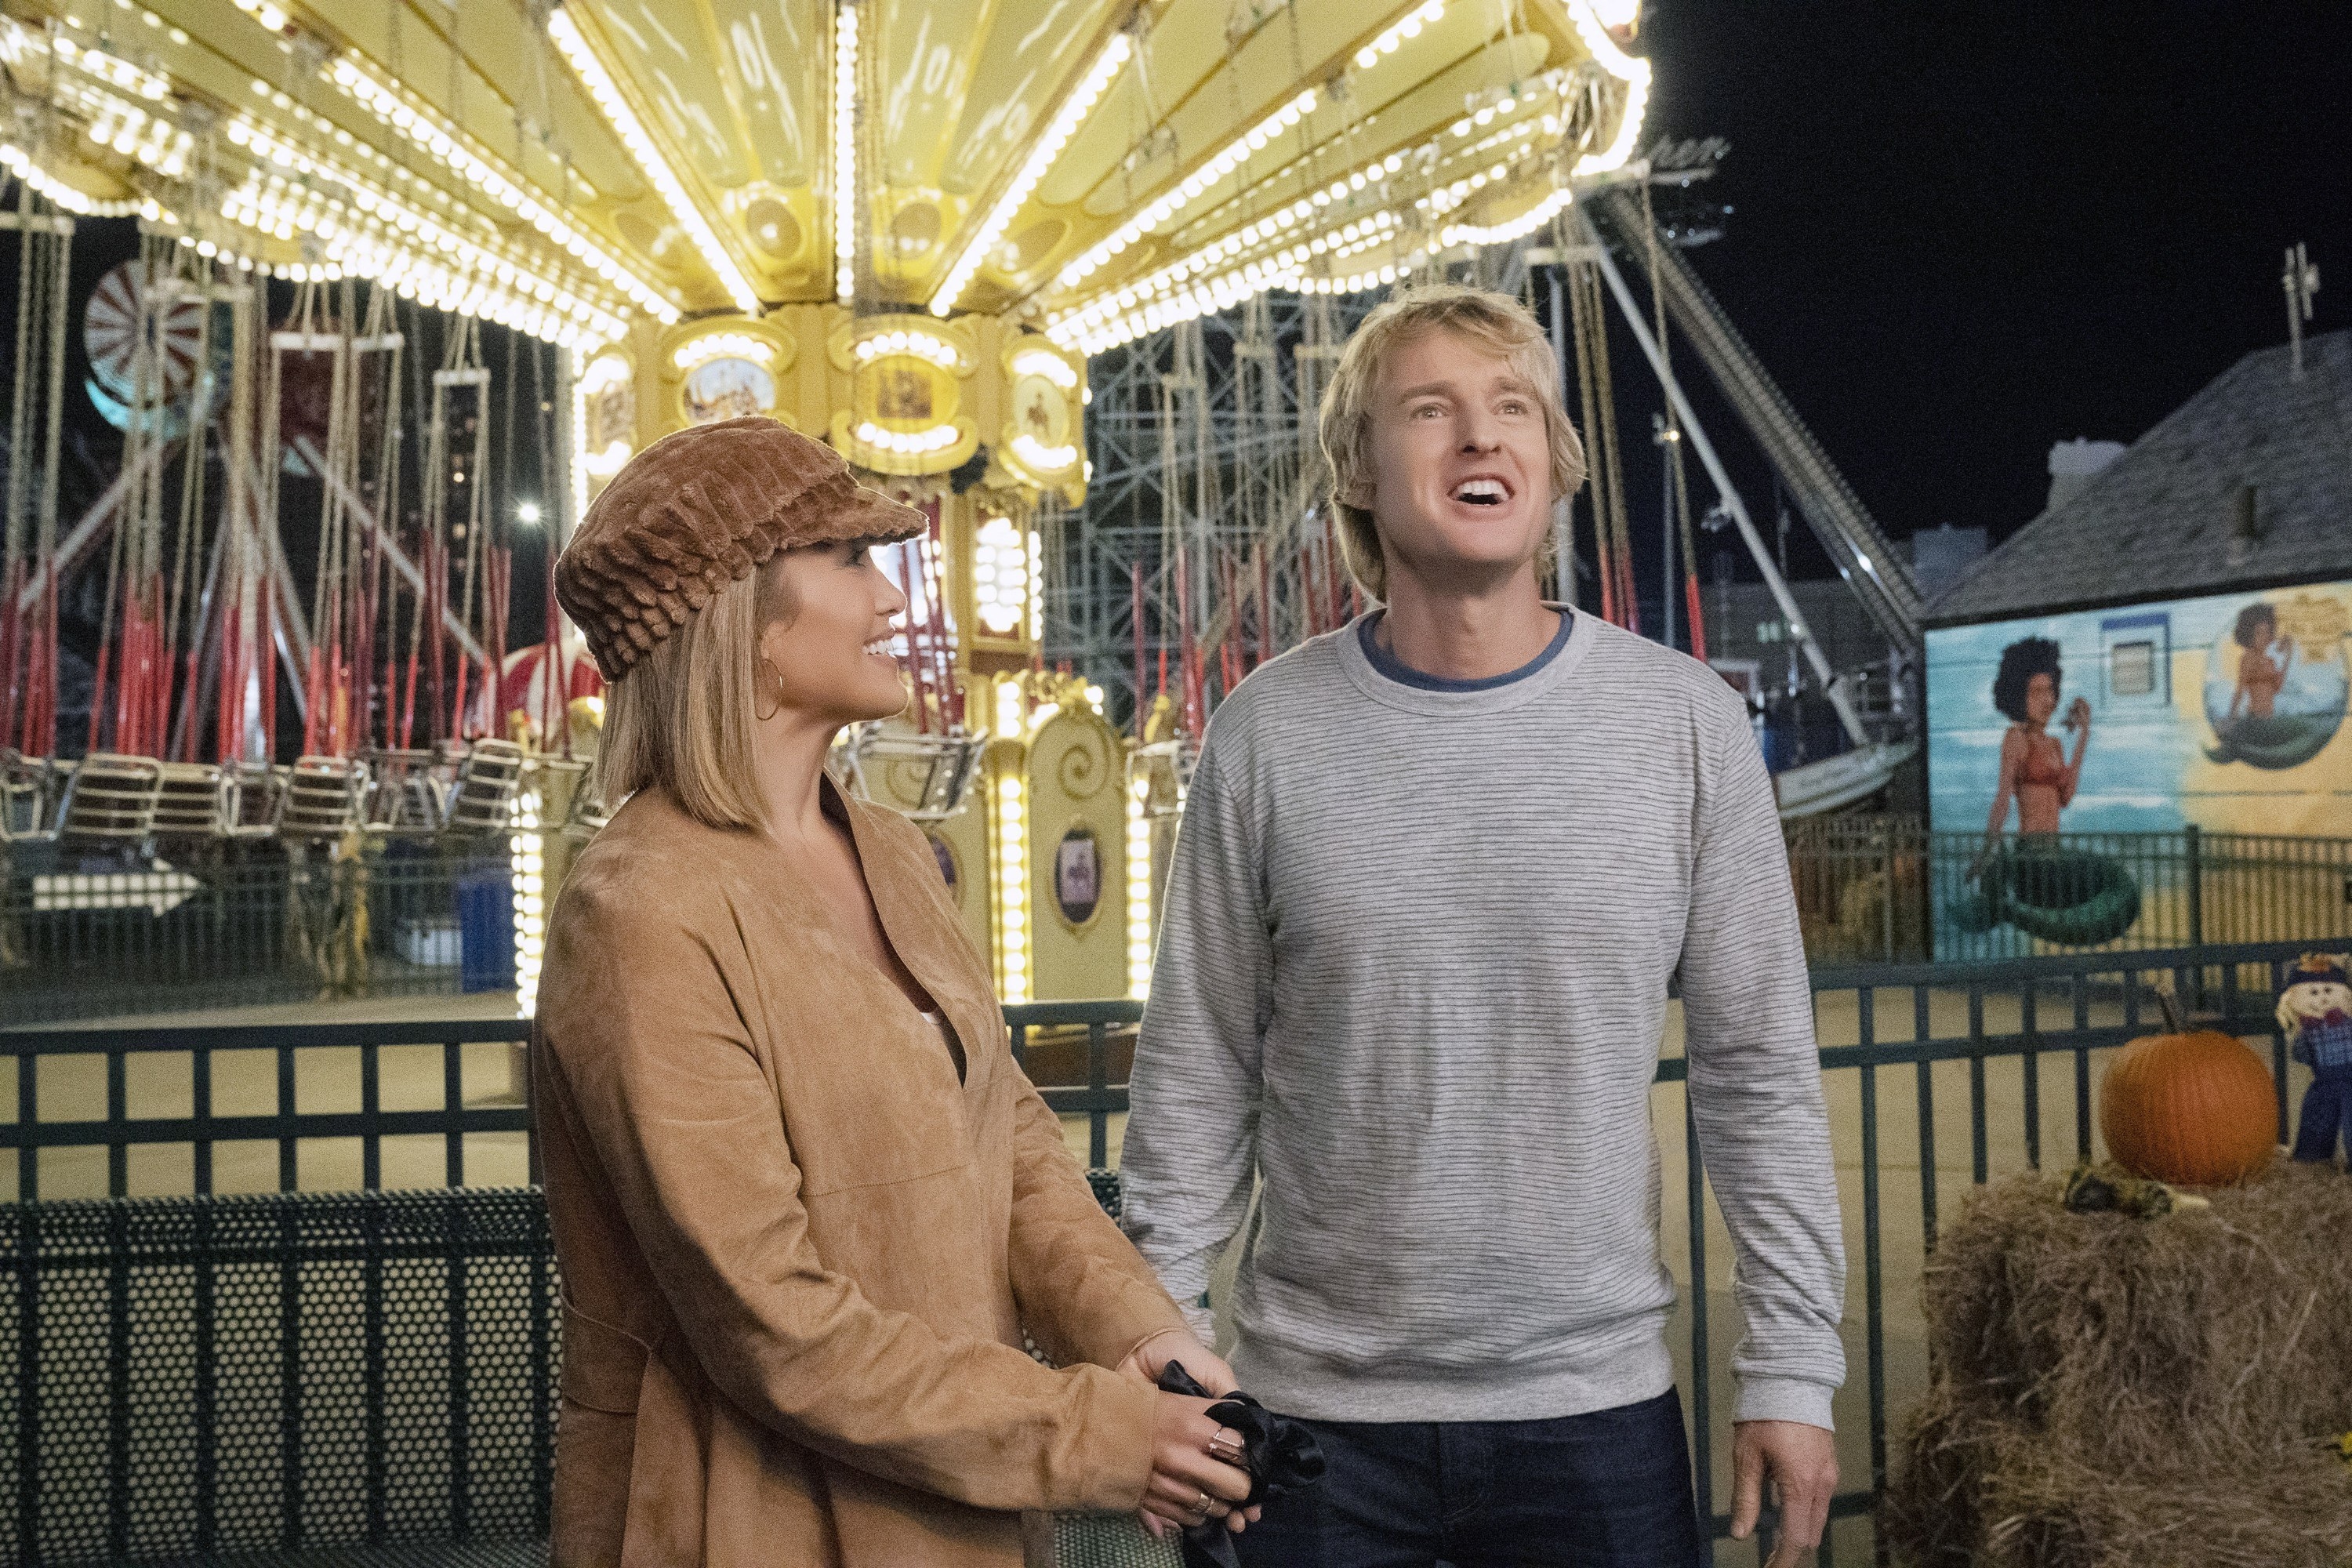 Jennifer Lopez and Owen Wilson standing next to a swings ride in Marry Me